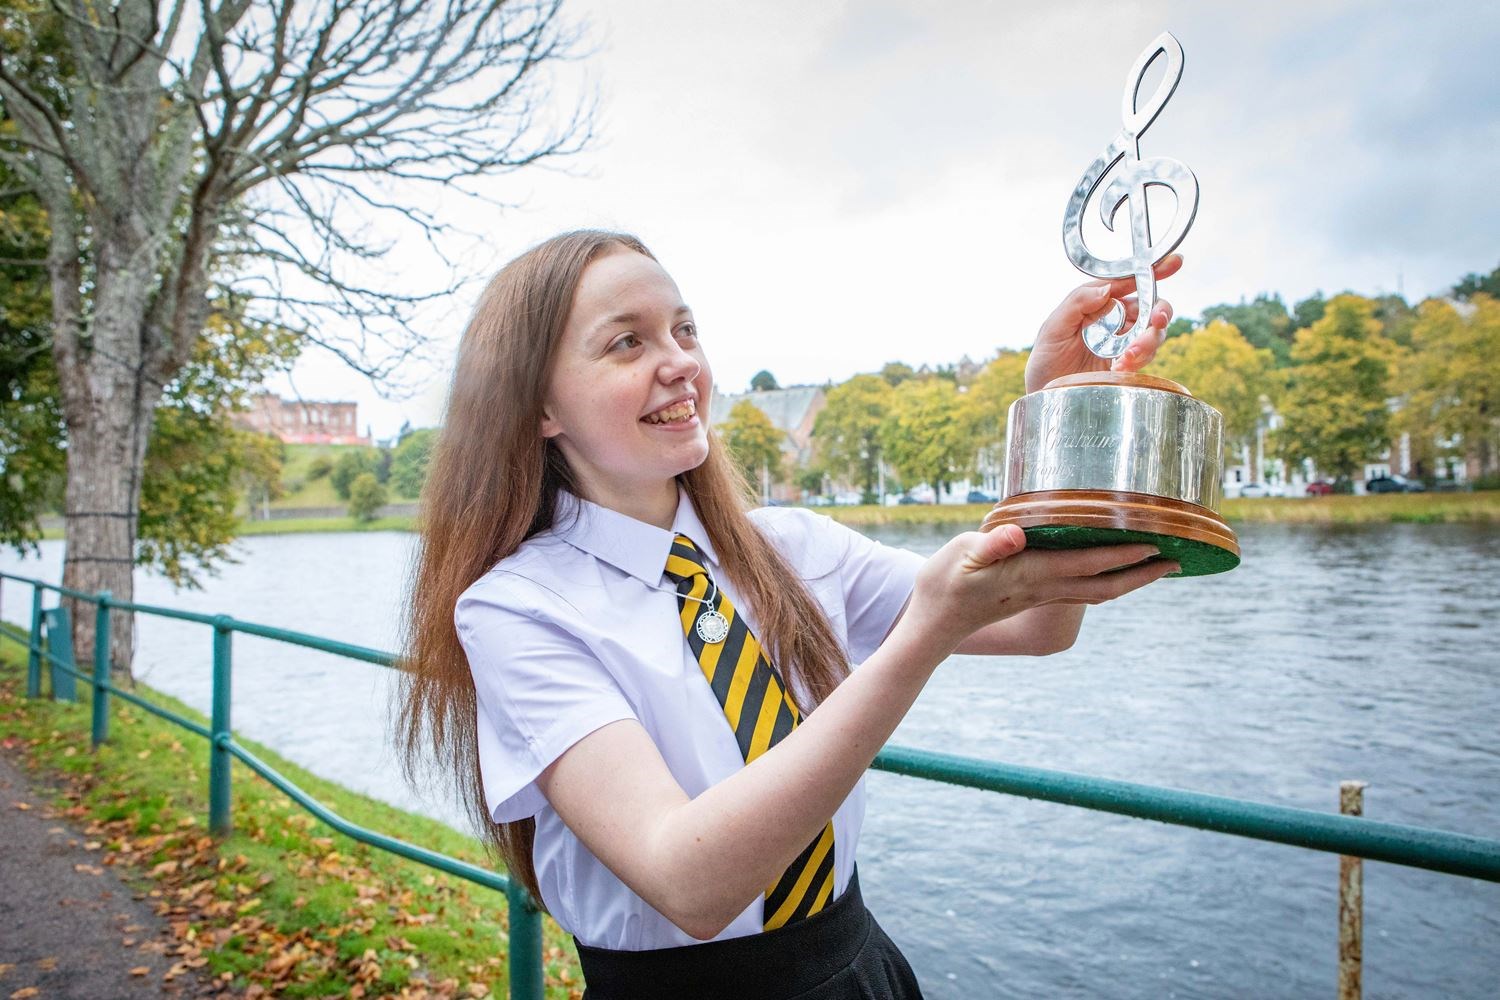 Naomi J Graham, age 15, from The Nicolson Institute School (Sgoil MhicNeacail) in Stornoway, Scotland, winner of the James C McPhee Memorial Medal at The Royal National Mòd 2021, in Inverness, Scotland.